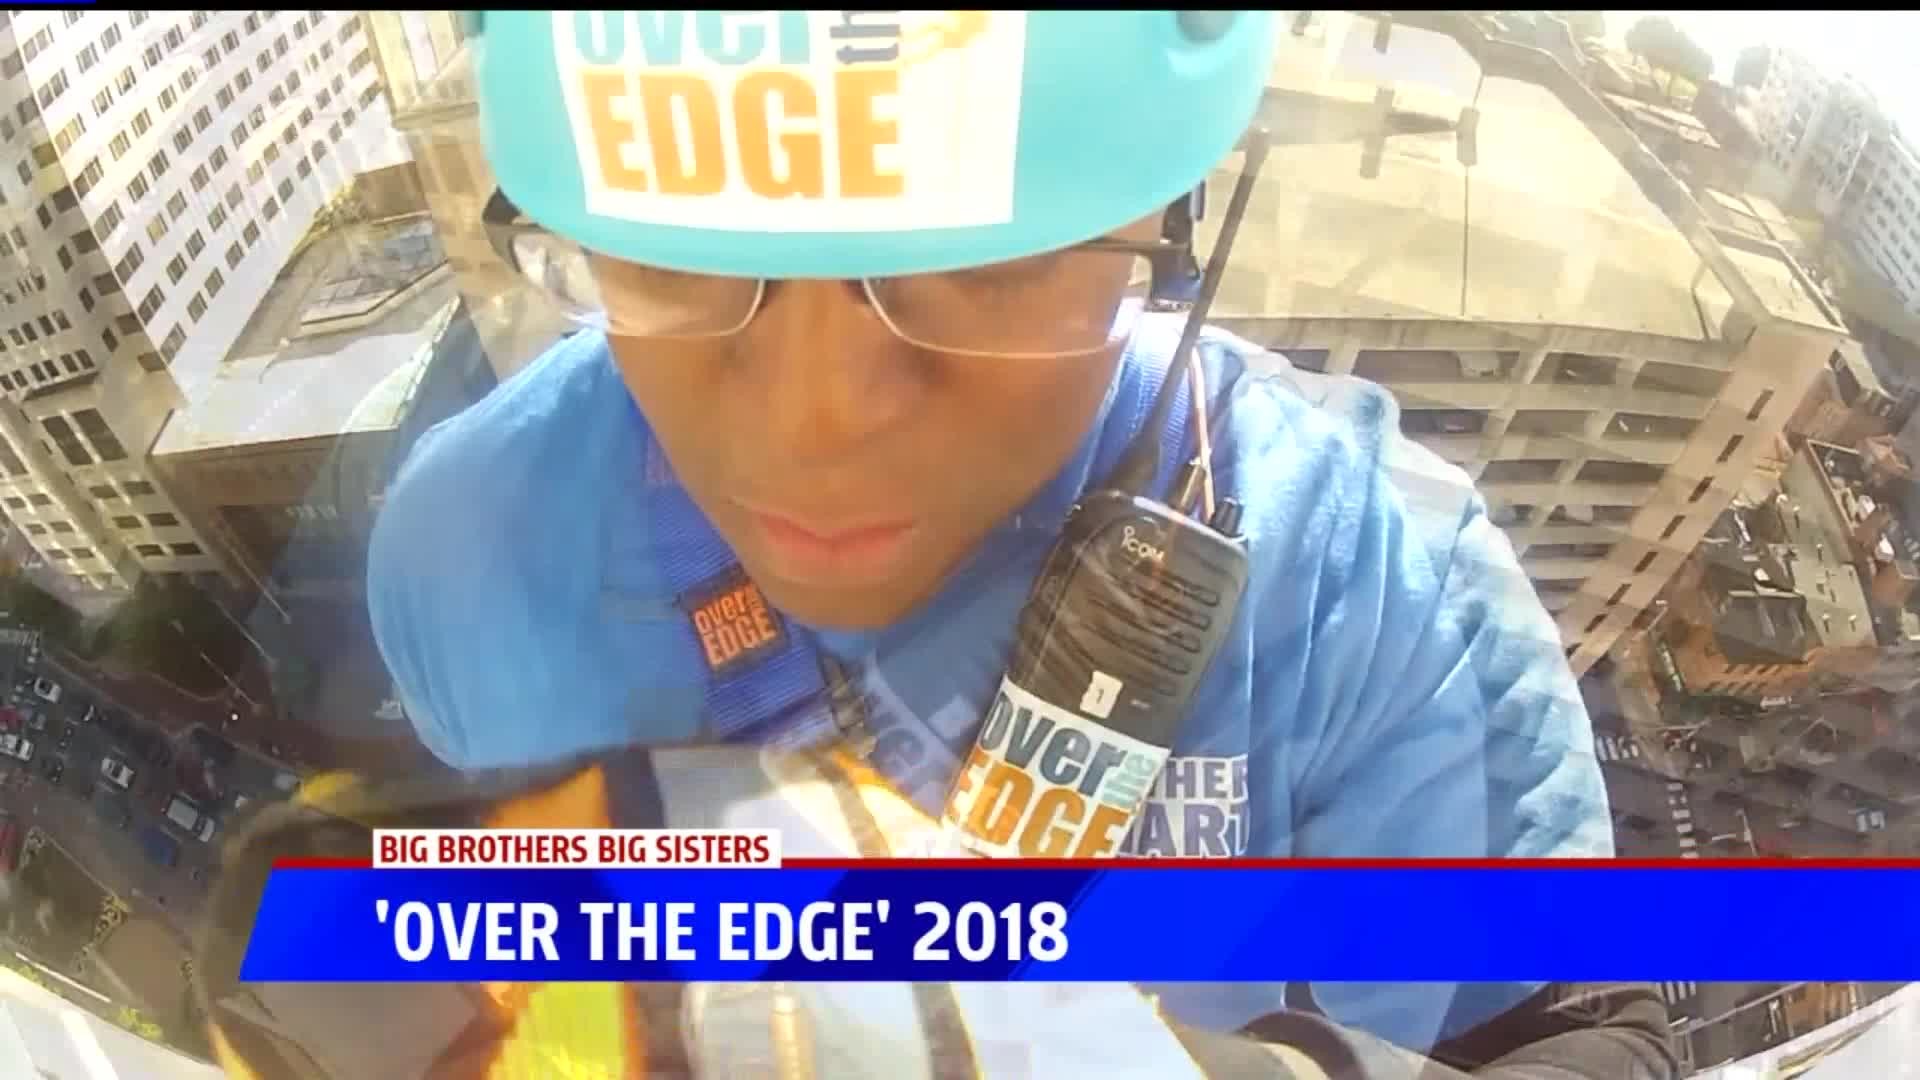 GoPro Climb Down the Building for Over the Edge